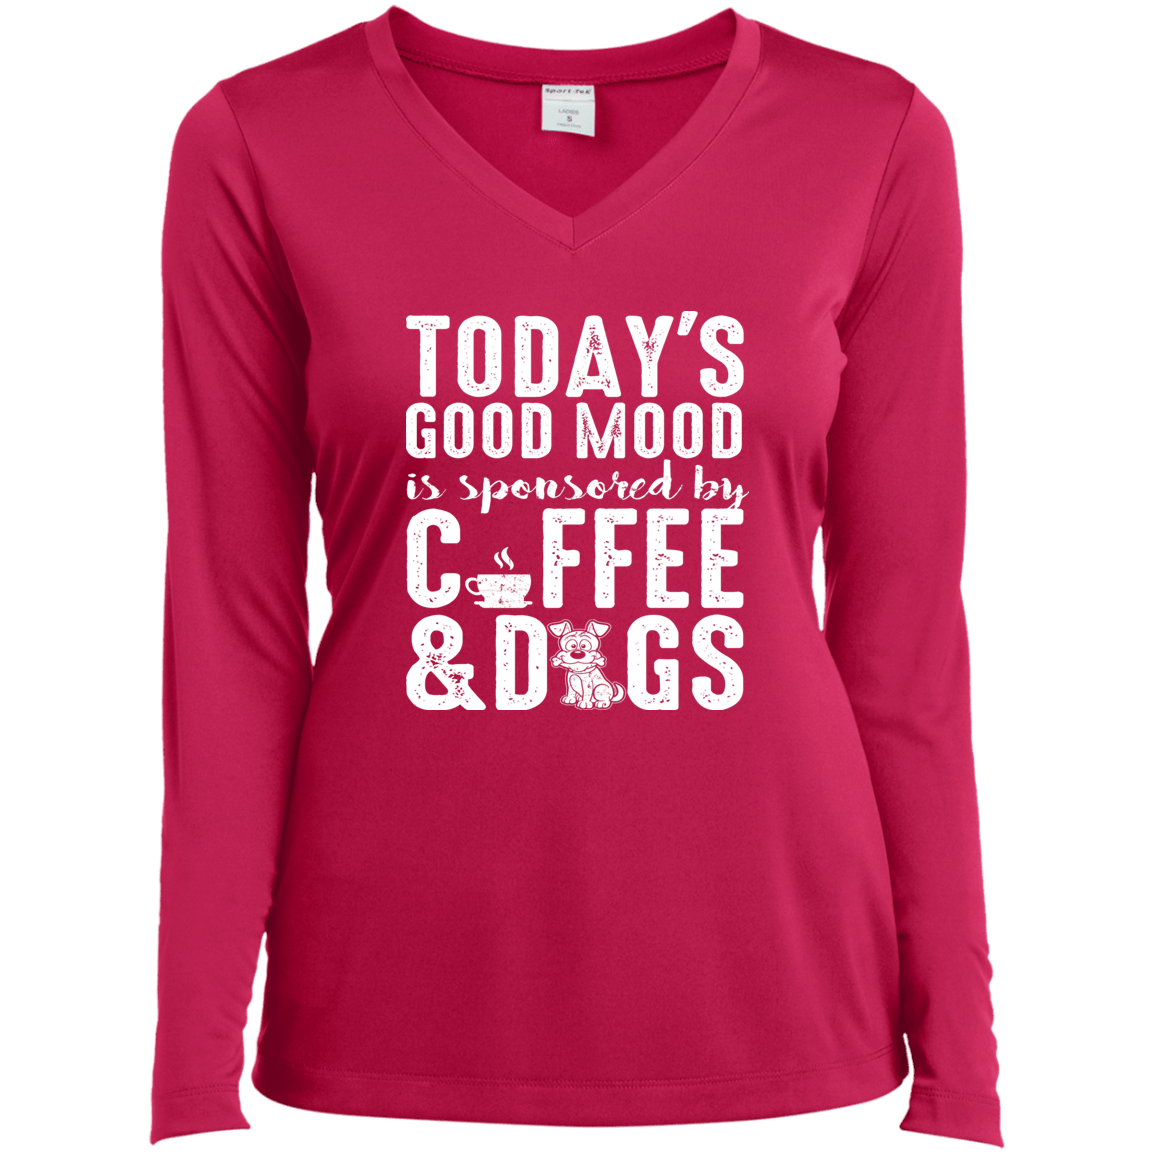 Today's Good Mood Coffee & Dogs - Long Sleeve Ladies V Neck.